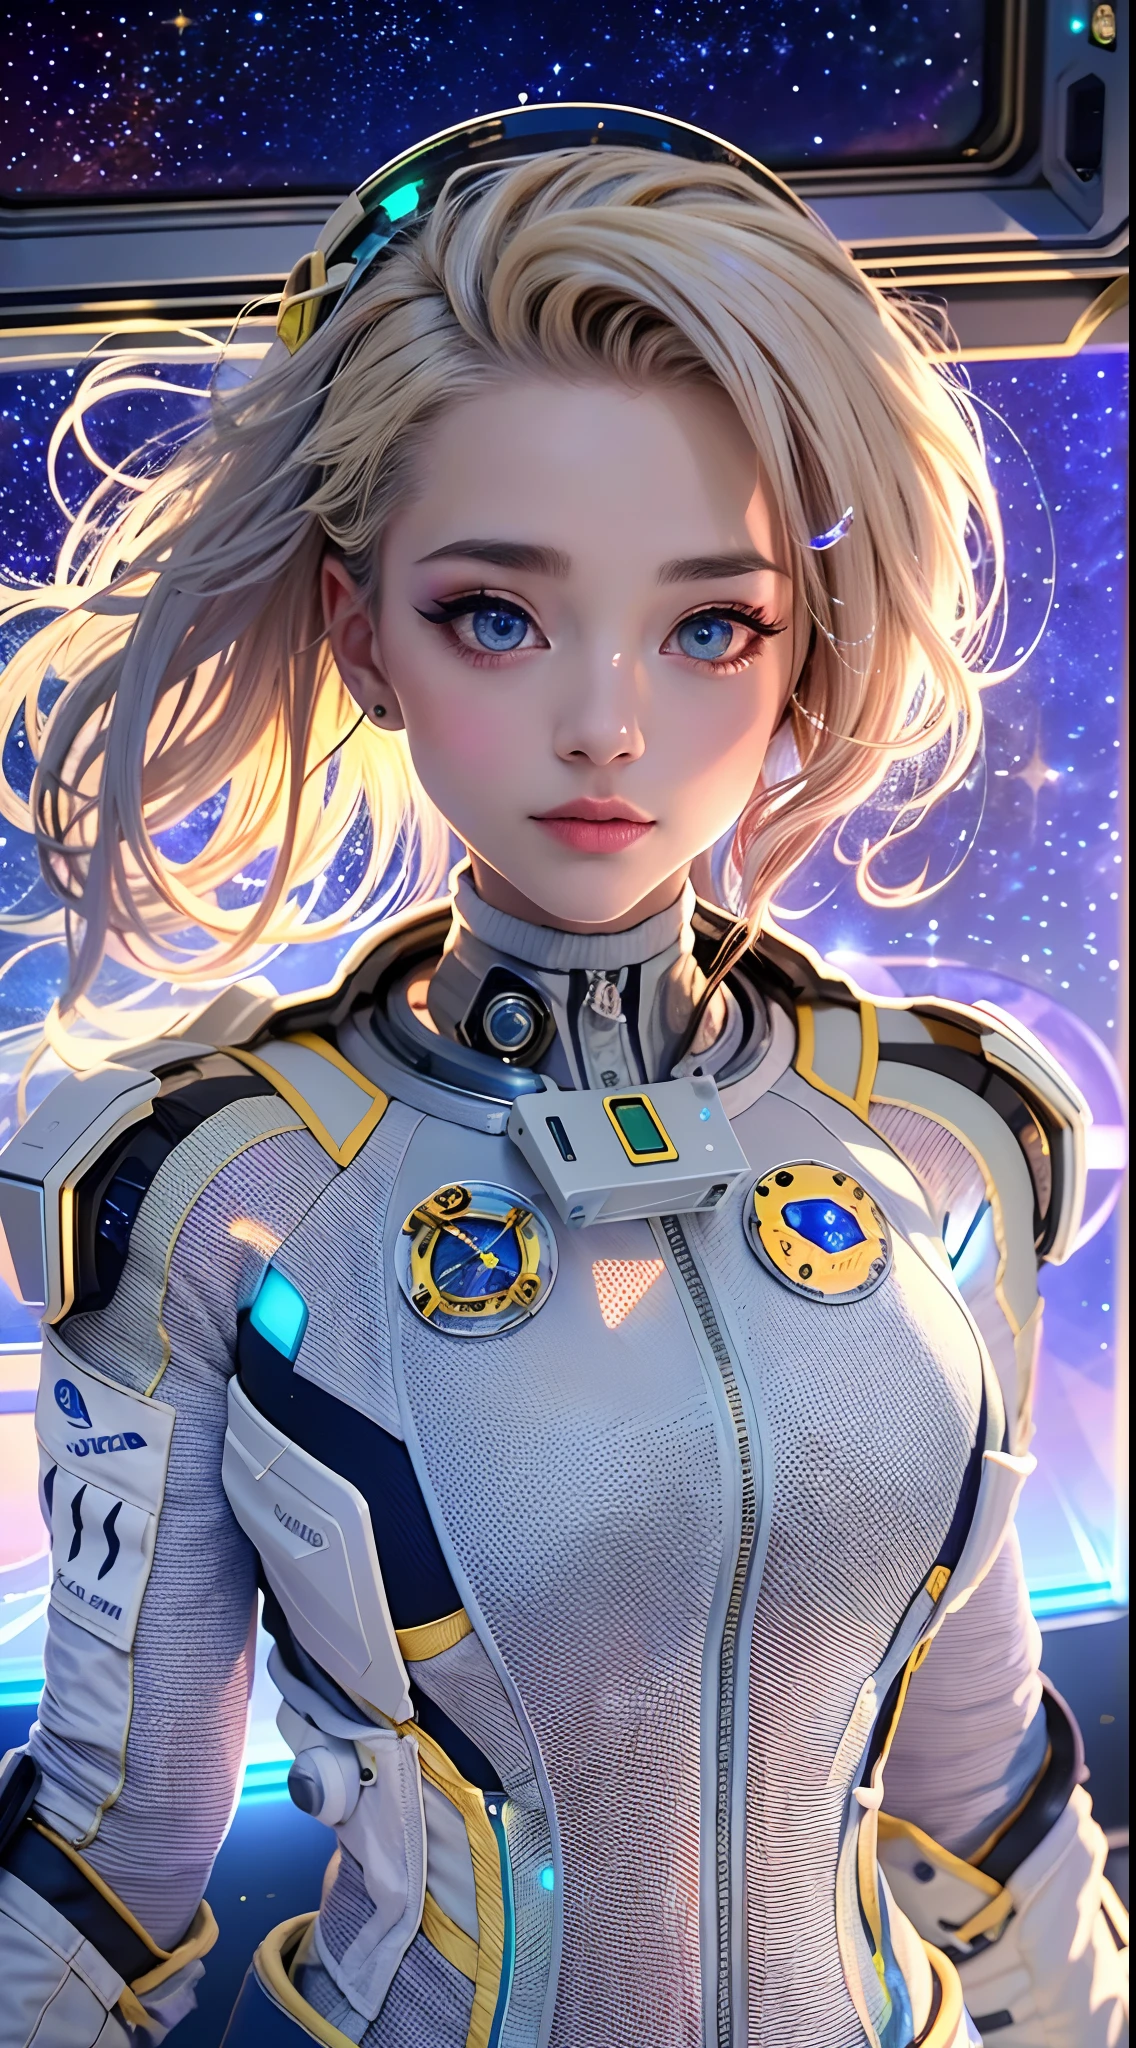 （tmasterpiece：1.2），best qualtiy，In space，（nigh sky，medium lenght hair：1.2），（illustratio：1.2），lindo cenario，dreads，（Elaborate luminescence，lens flare glow），（Hyper-detailing），Hyper-detailing，（exquisitedetails），（complexdetailovie light，Best quality backlight），Clear lines，New world，peeping at the viewer，Solo Woman，（Space Girl，the space），Oriental women，The girl looks like a Chinese movie star，Solo Woman，Perfect body，Beautiful 16 year old girl，（1girll），（Bright bioluminescent hair，bright glowing eyes），（Galaxies，Alien planet），（Astronaut wearing sexy futuristic style white fitted spacesuit：1.1），The material of the spacesuit is light and thin，Latex tight spacesuit，The chest of the spacesuit shows the starry sky，Slightly closed eyes，（cyber punk perssonage），（dyna：1.3），（putting makeup on）），hight contrast，（The best lighting，Extremely refined and beautiful），（（Movie Moonlight）），Extremely colorful，（（Photoshop Pastel Painting：1.1）），aethereal，（Movie Masterpiece），suspense，Funk，（Starscream），splash of color，absolutly eye-catching，（（Caustics）），dynamic angle，big breasts beautiful（detailed glow），（spine-chilling），（Intricate movie scenes behind it：1.2），Environmental occlusion， （Ambient moonshine）， ray-traced reflection， intricately detailed visible background ， （Glowing spacesuit）， terroral， （Bioluminescent vegetation：1.2）， terroral， uneasy， A futuristic， terroral， （Hologram heads-up display）， （Delicate Great Comet）